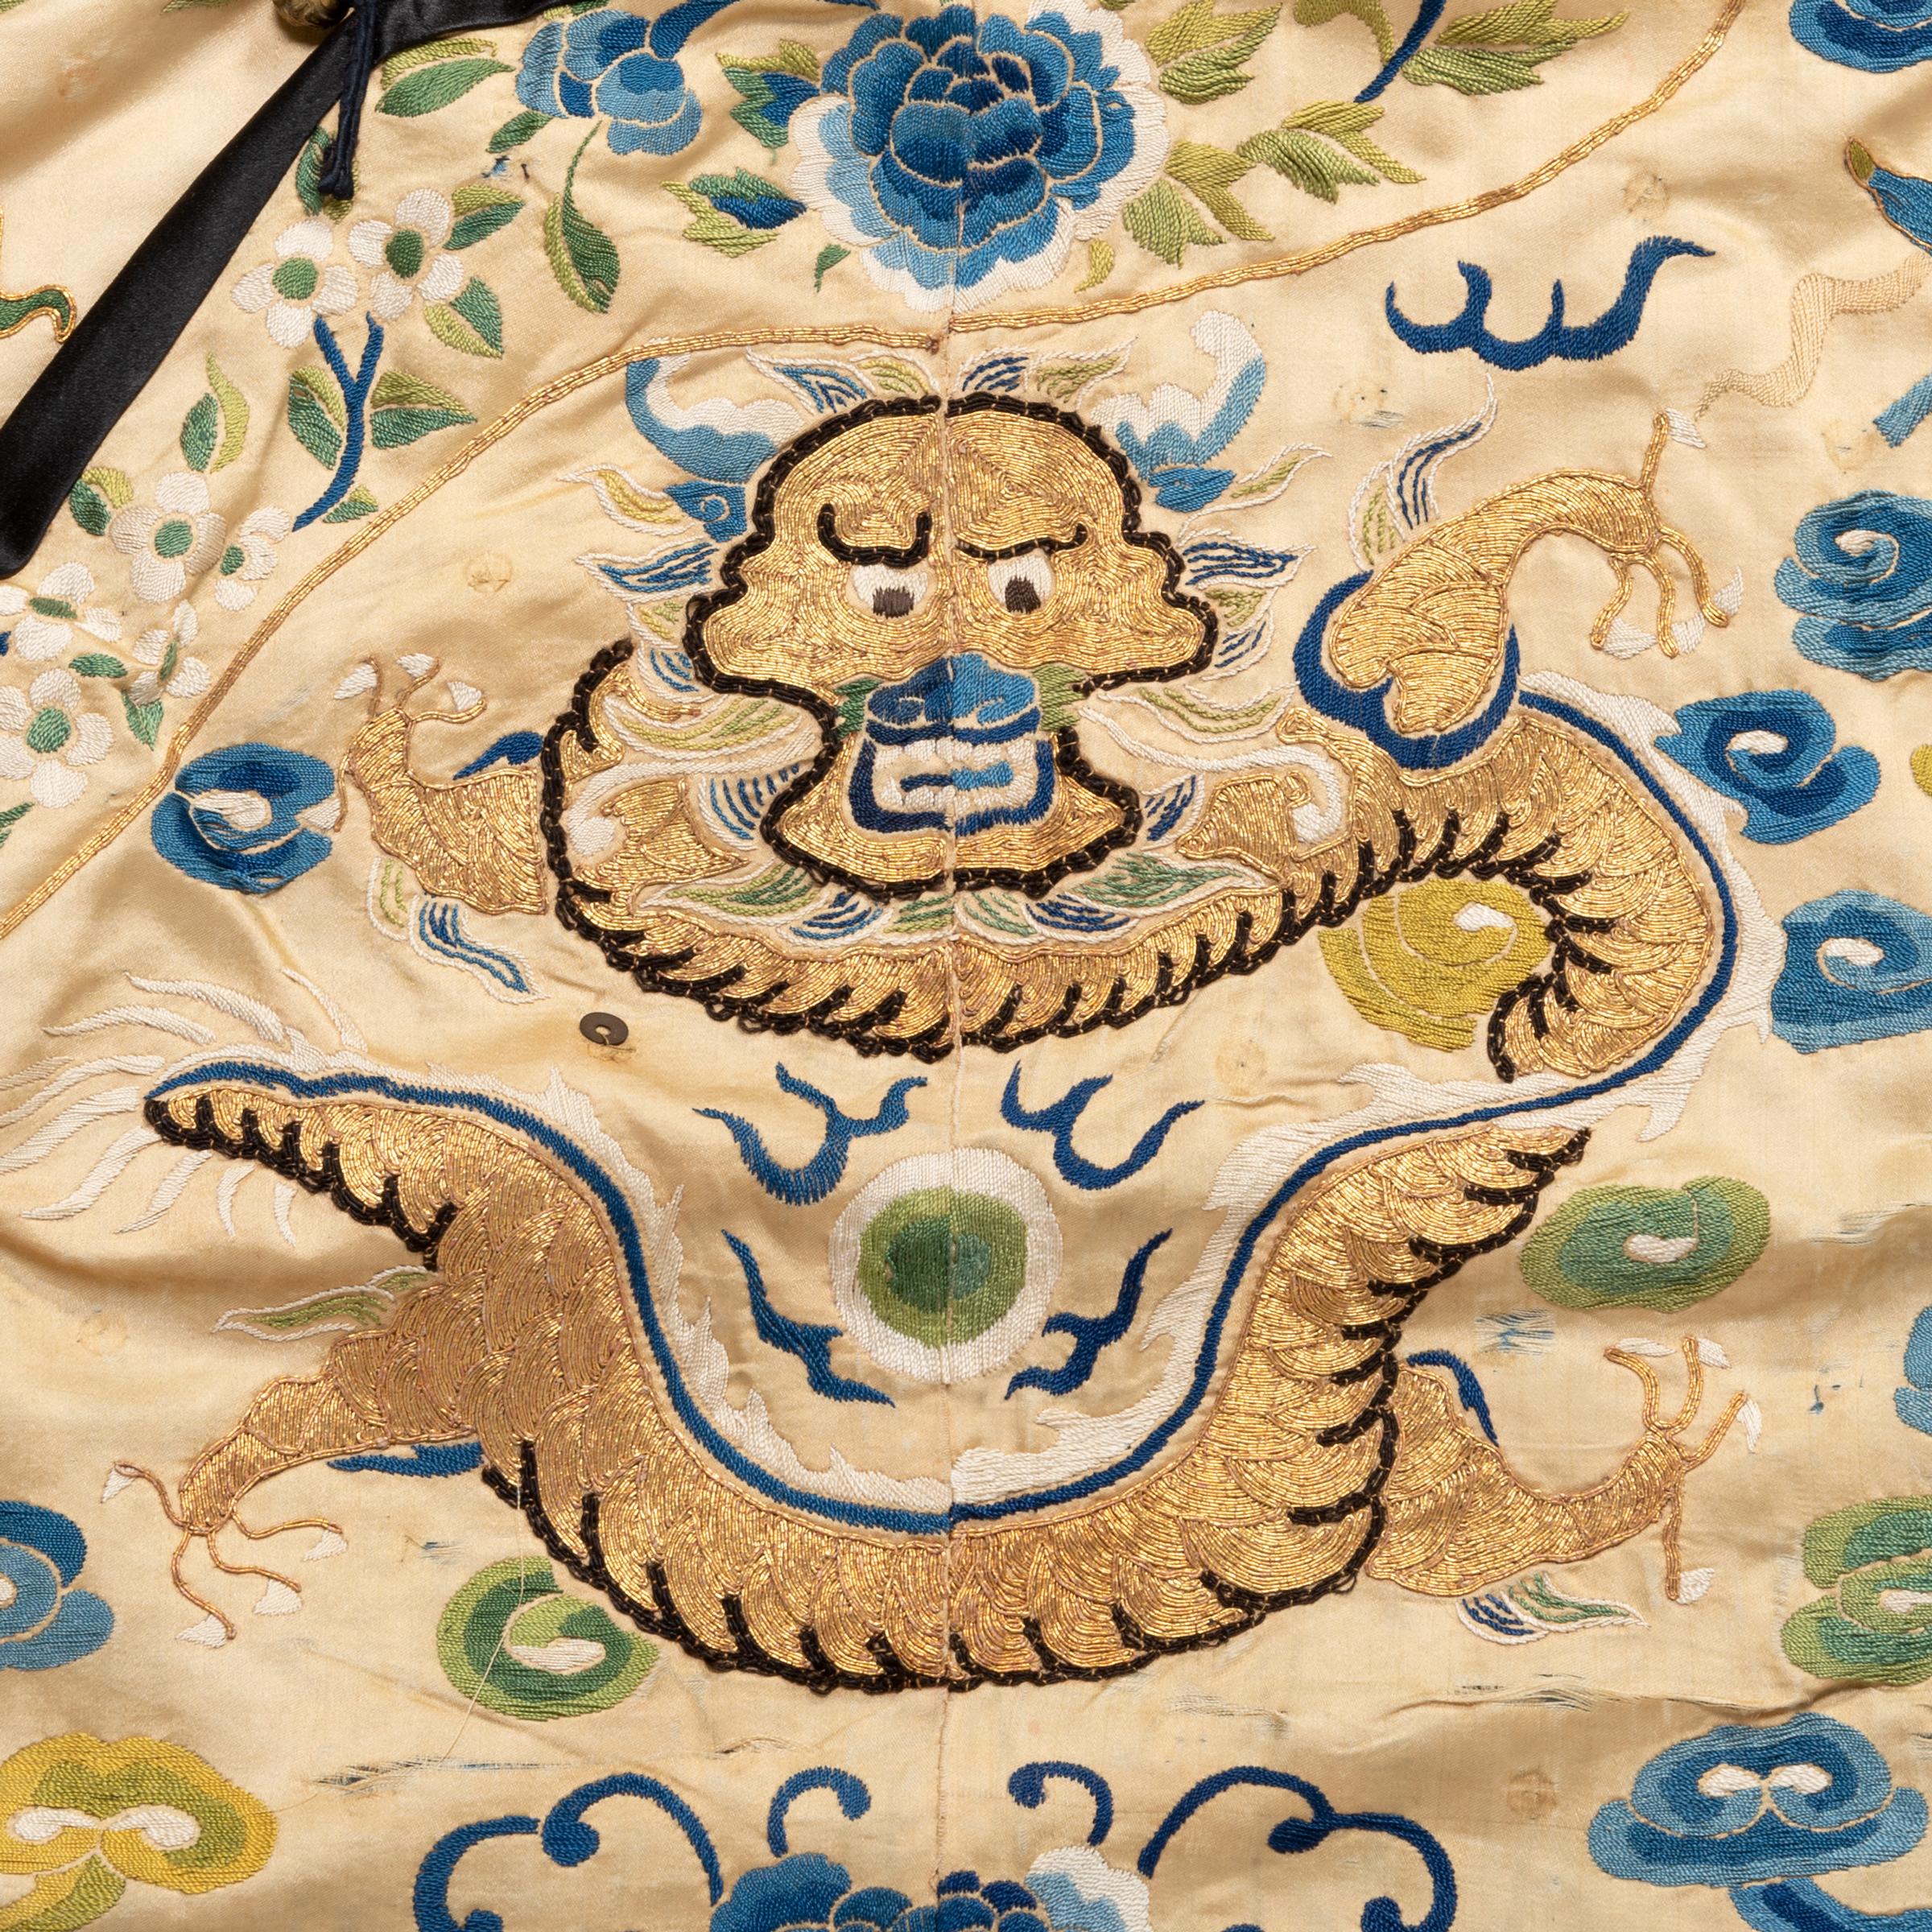 Exquisite embroidery creates a fantastical backdrop for the mystical dragons that adorn this 19th-century Chinese robe. Depicted with great detail and fancy, golden dragons twist and twirl their way across the garment, through a celestial realm of